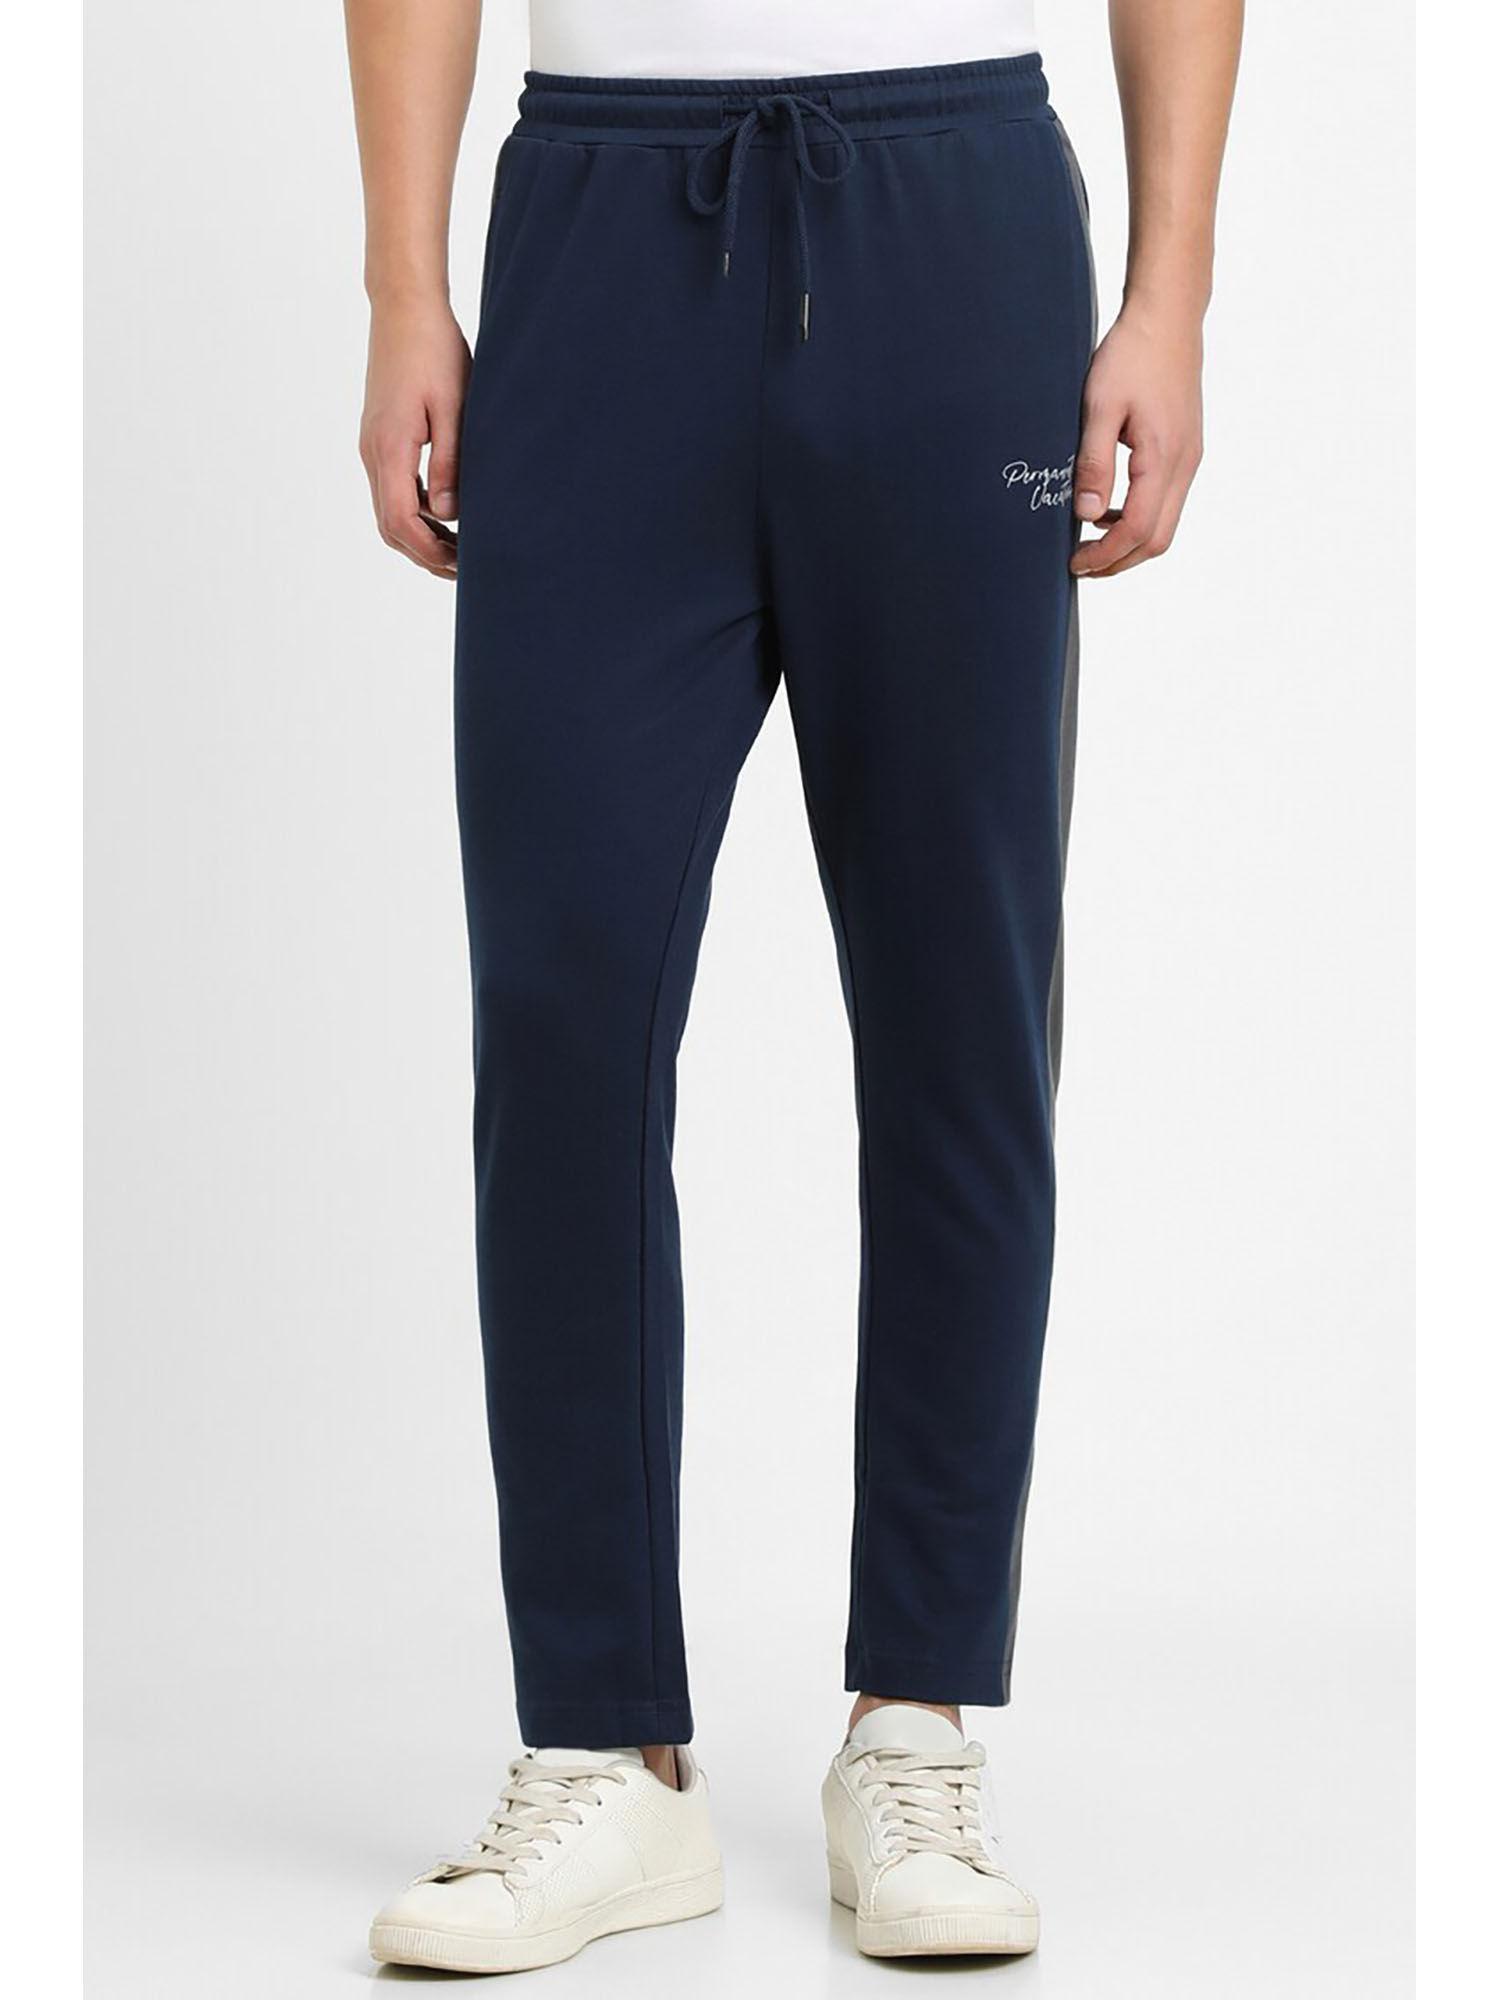 navy blue solid track pant